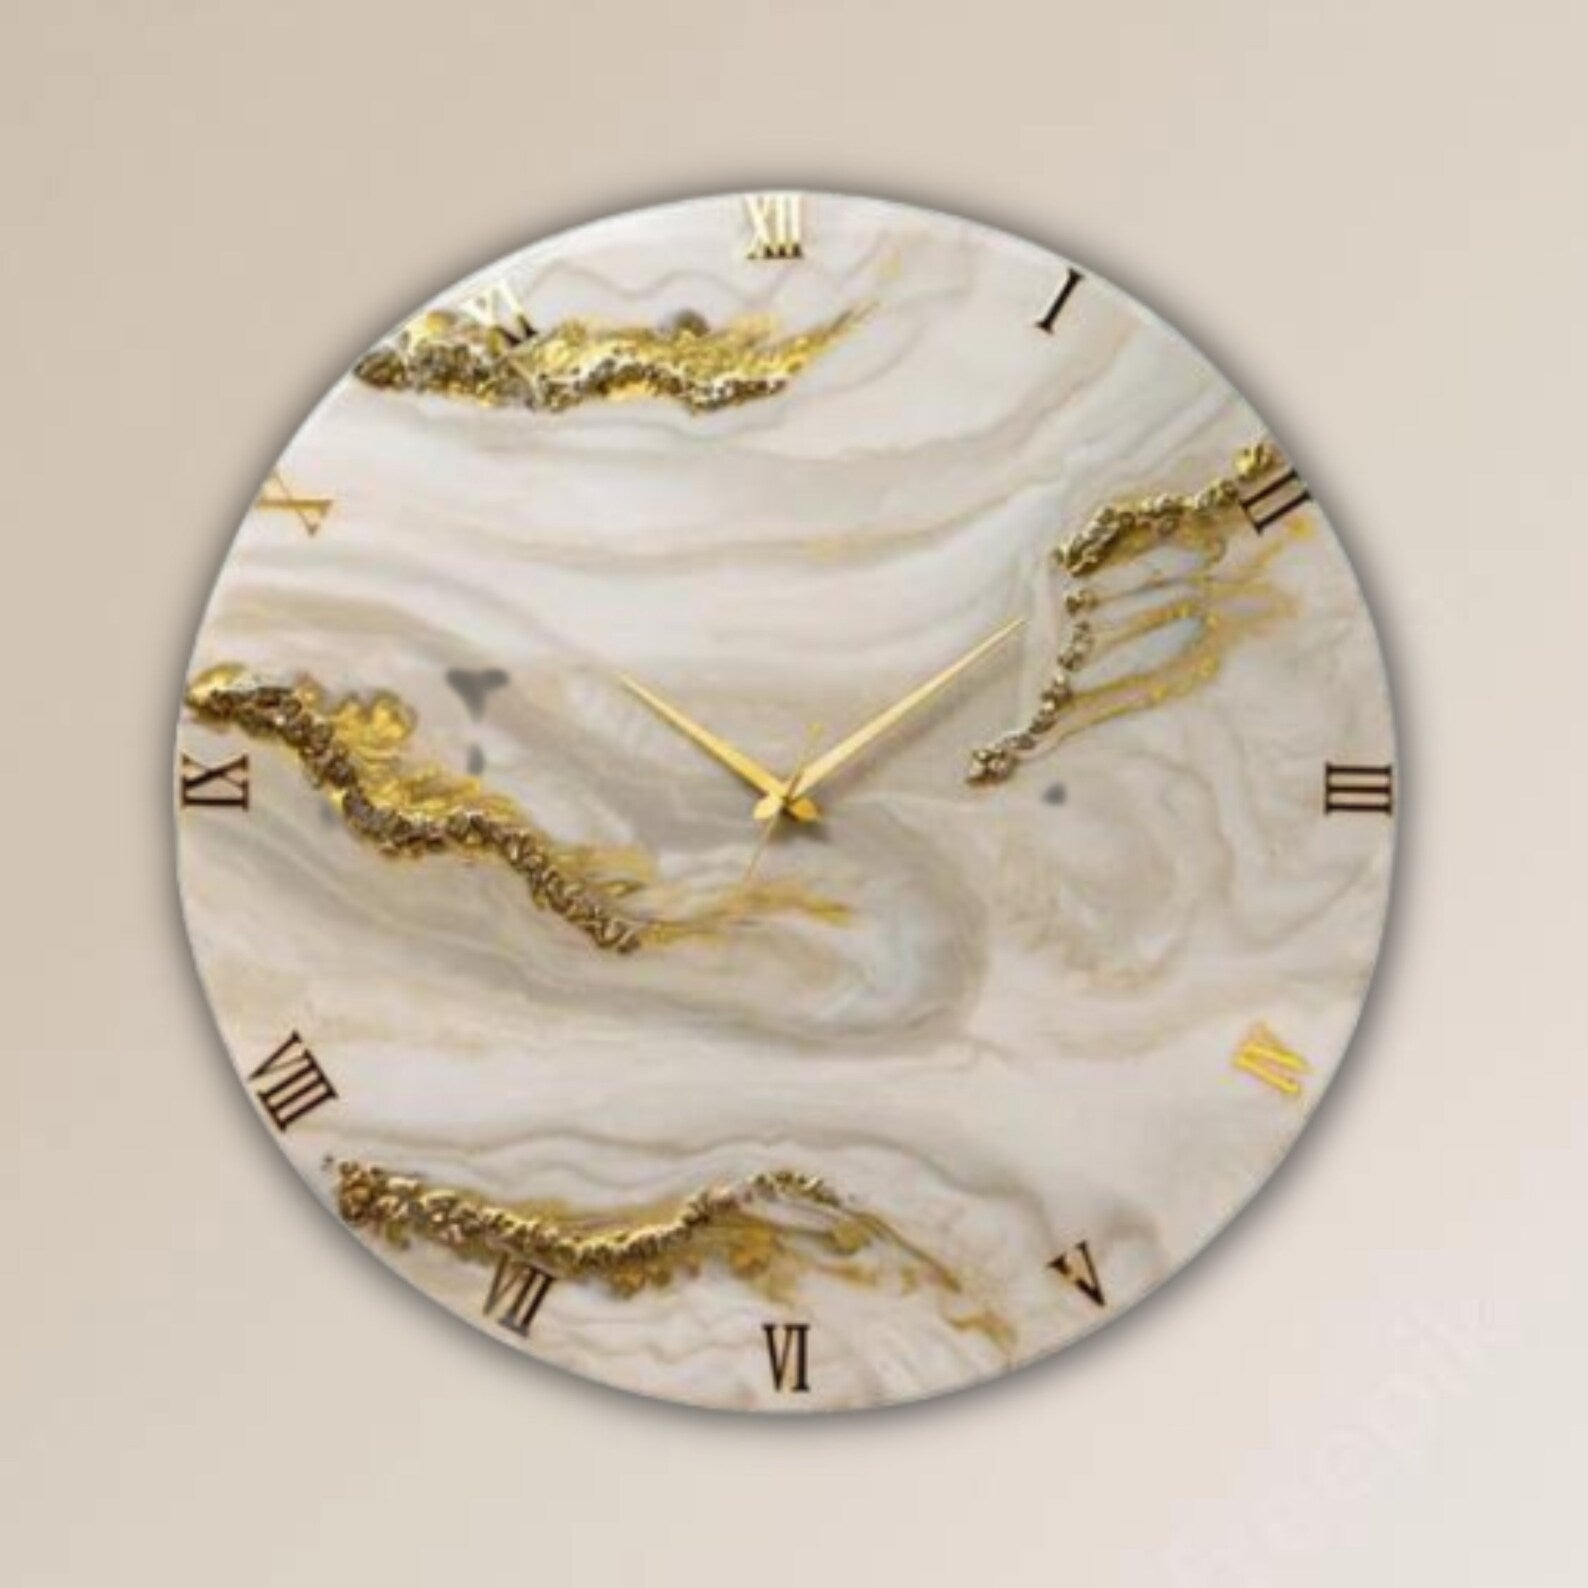 ATTRACTIVE OFF-WHITE GOLD EPOXY WATCH - The First Decor